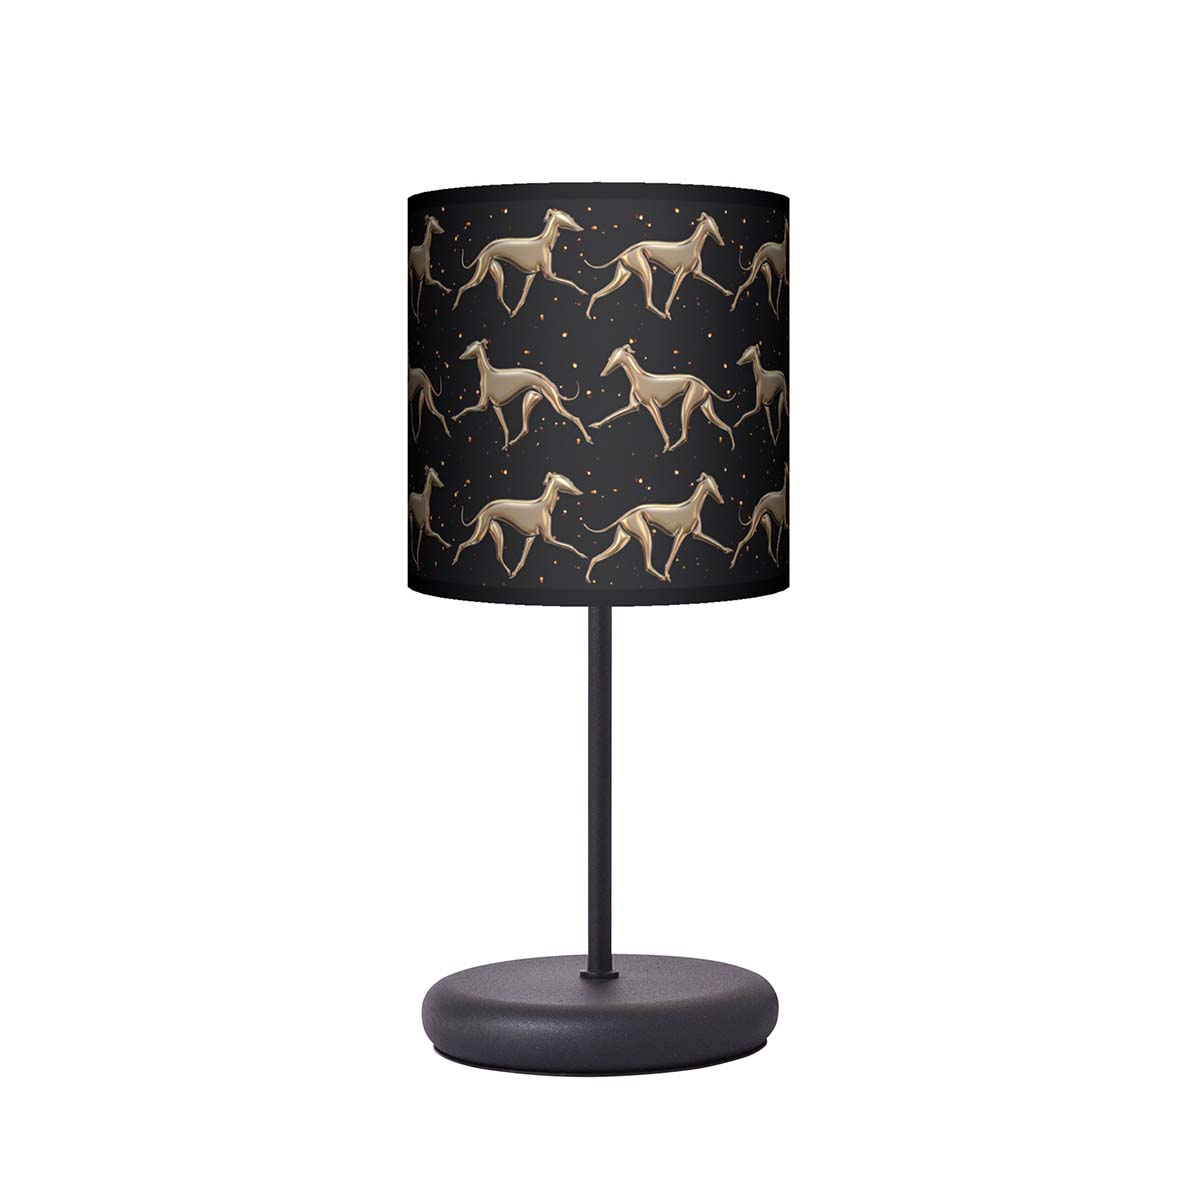 Desk lamp with sighthounds GOLD IGGY - Wear.Chartbeat image 1